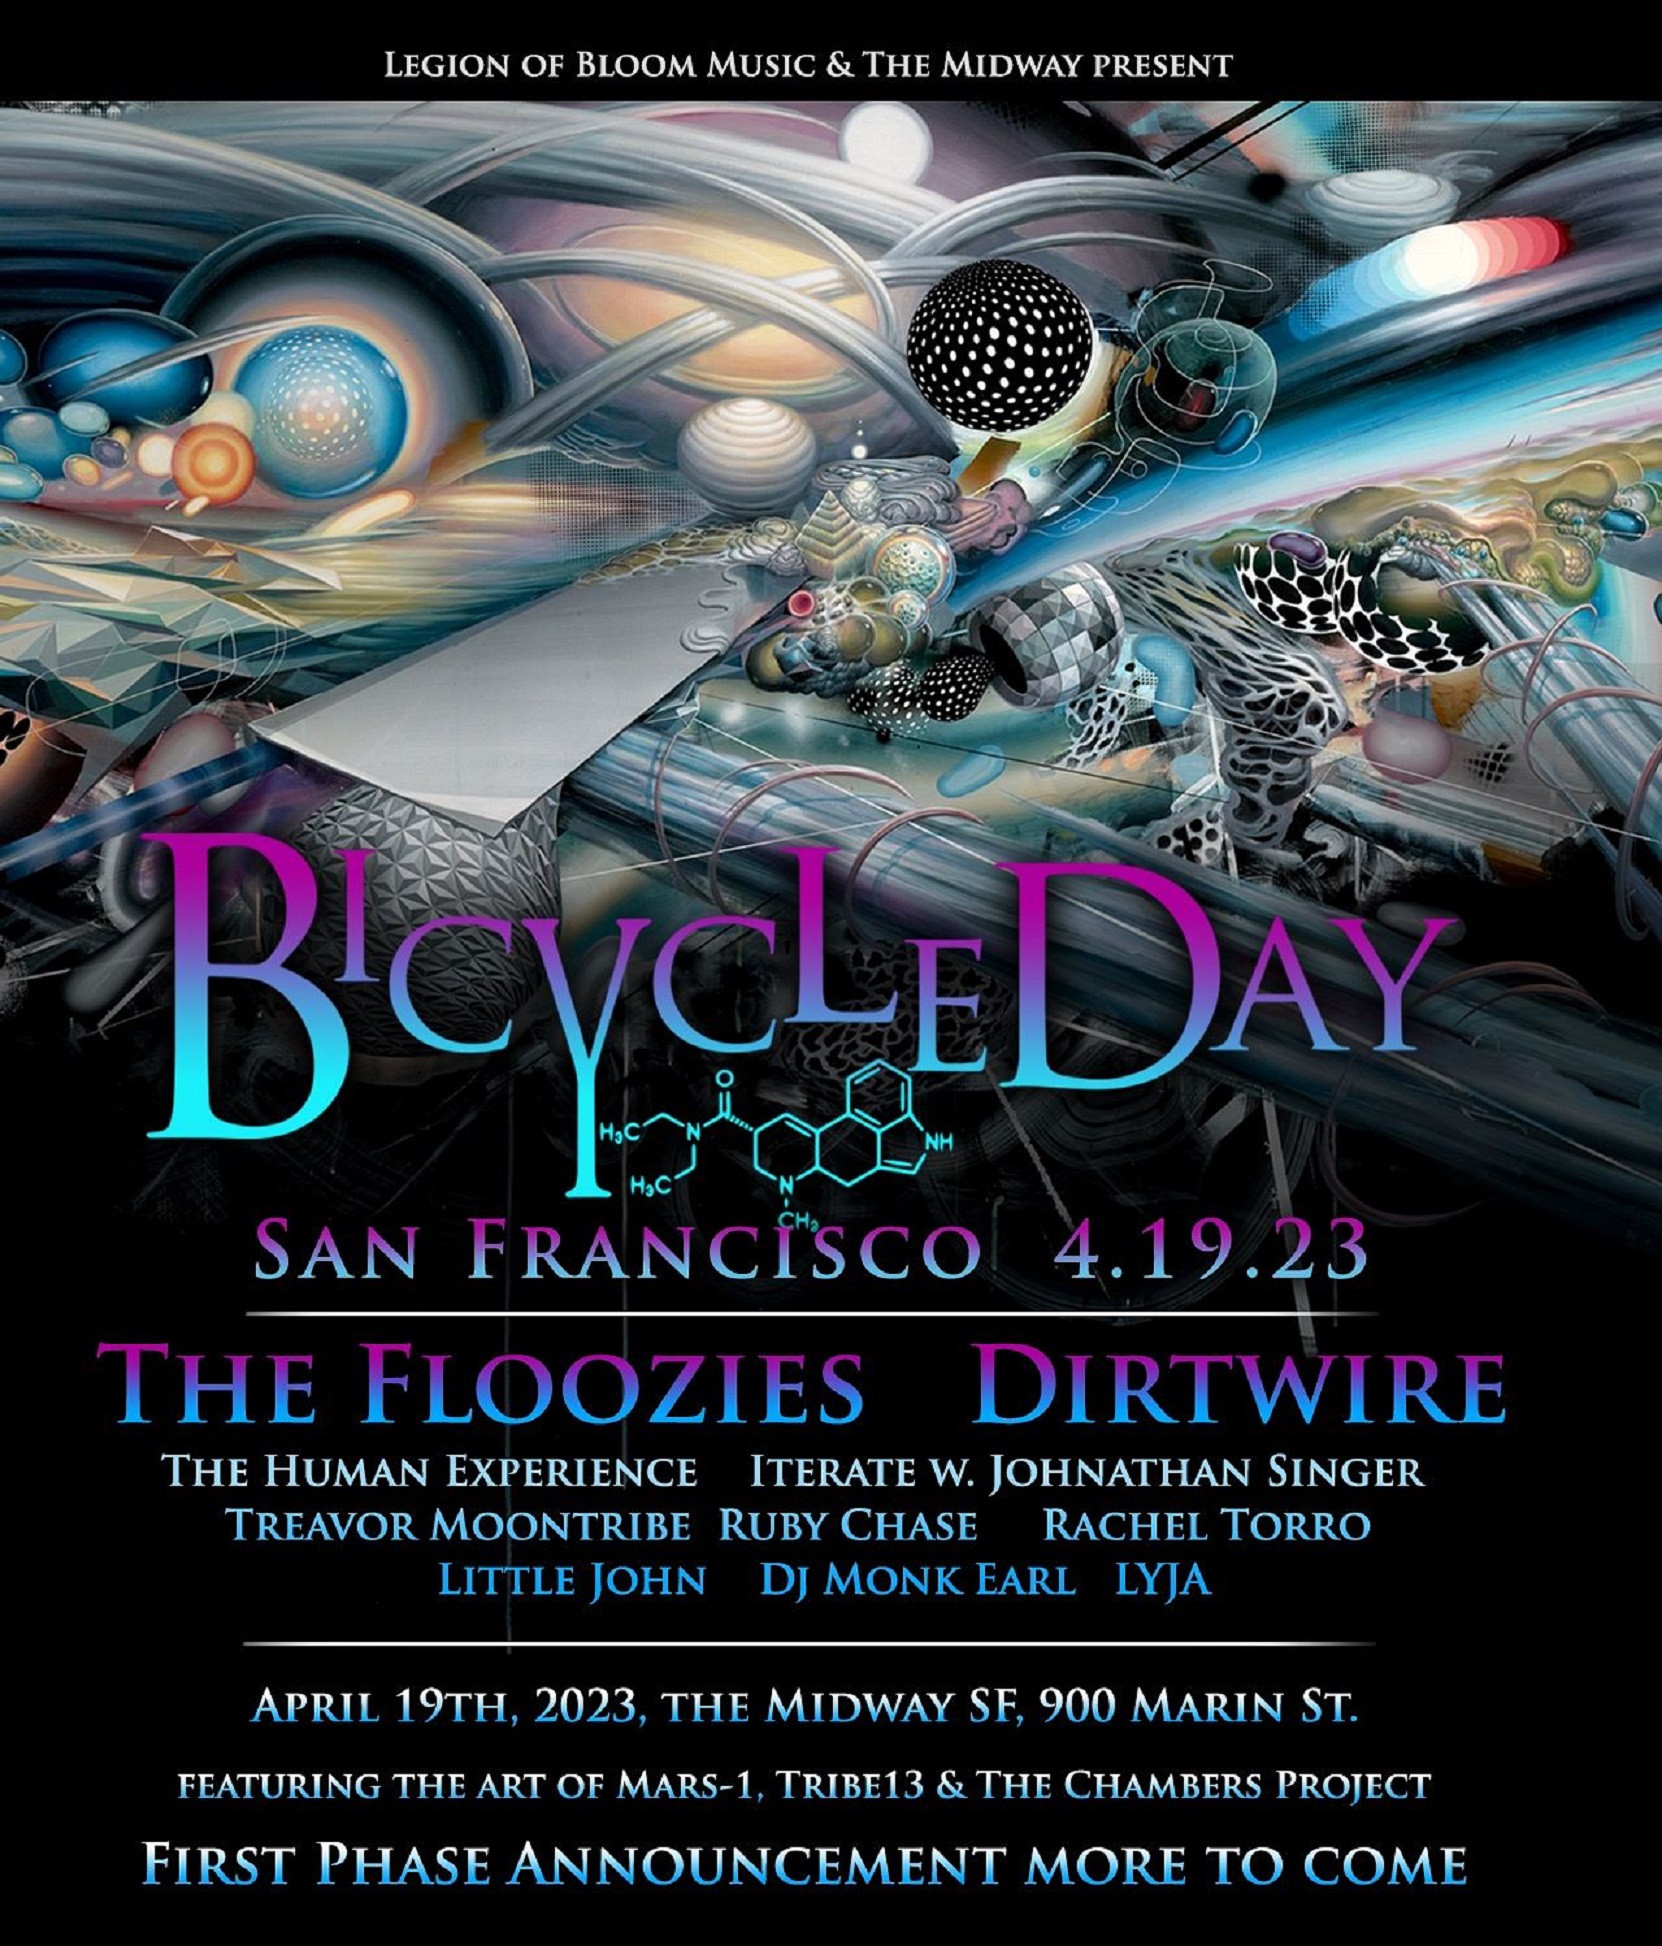 Bicycle Day SF returns with addition of a Two-Day Psychedelic Conference + Performances by The Floozies